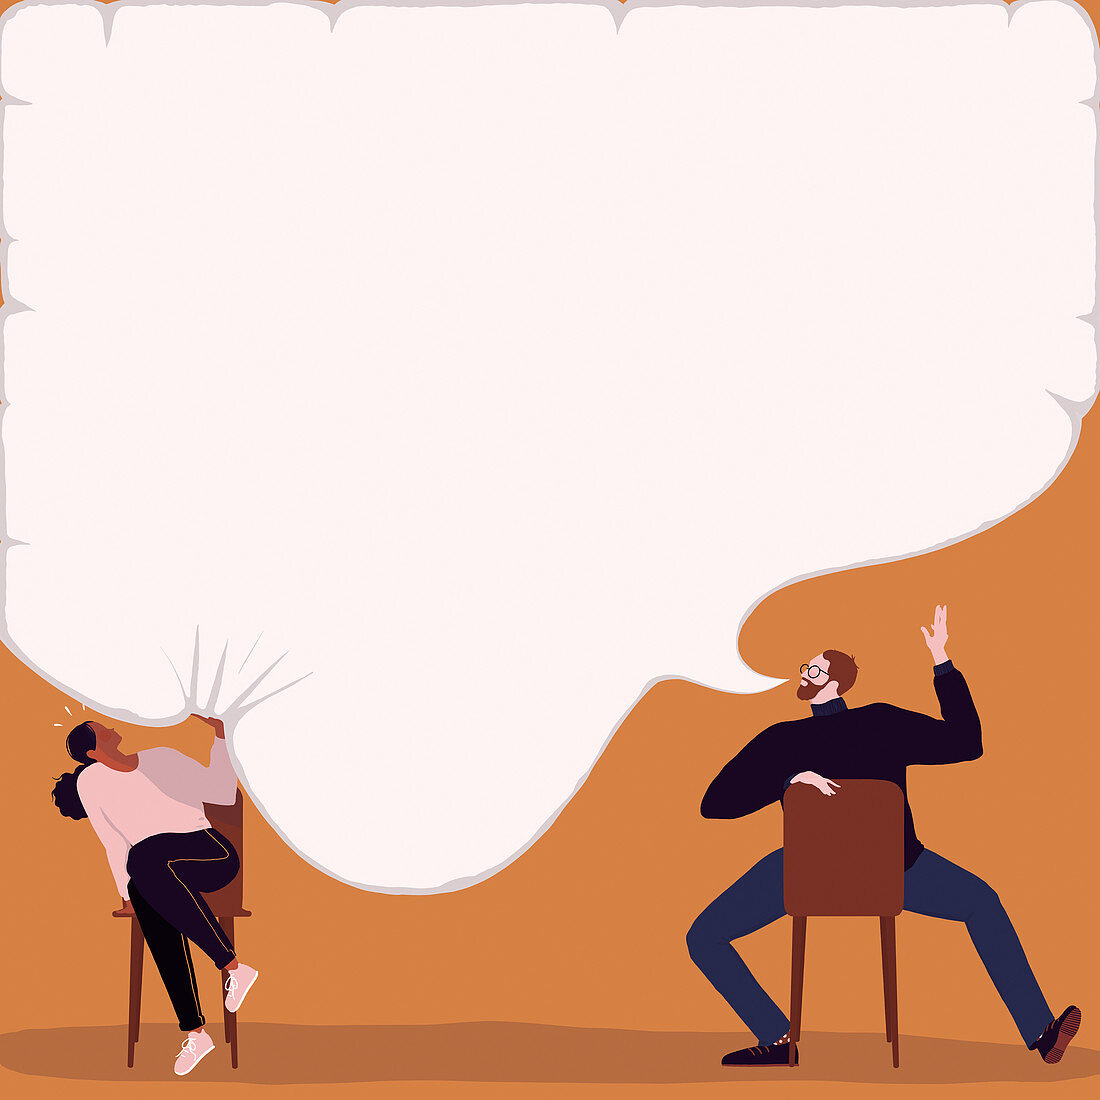 Woman being squashed by man's speech bubble, illustration